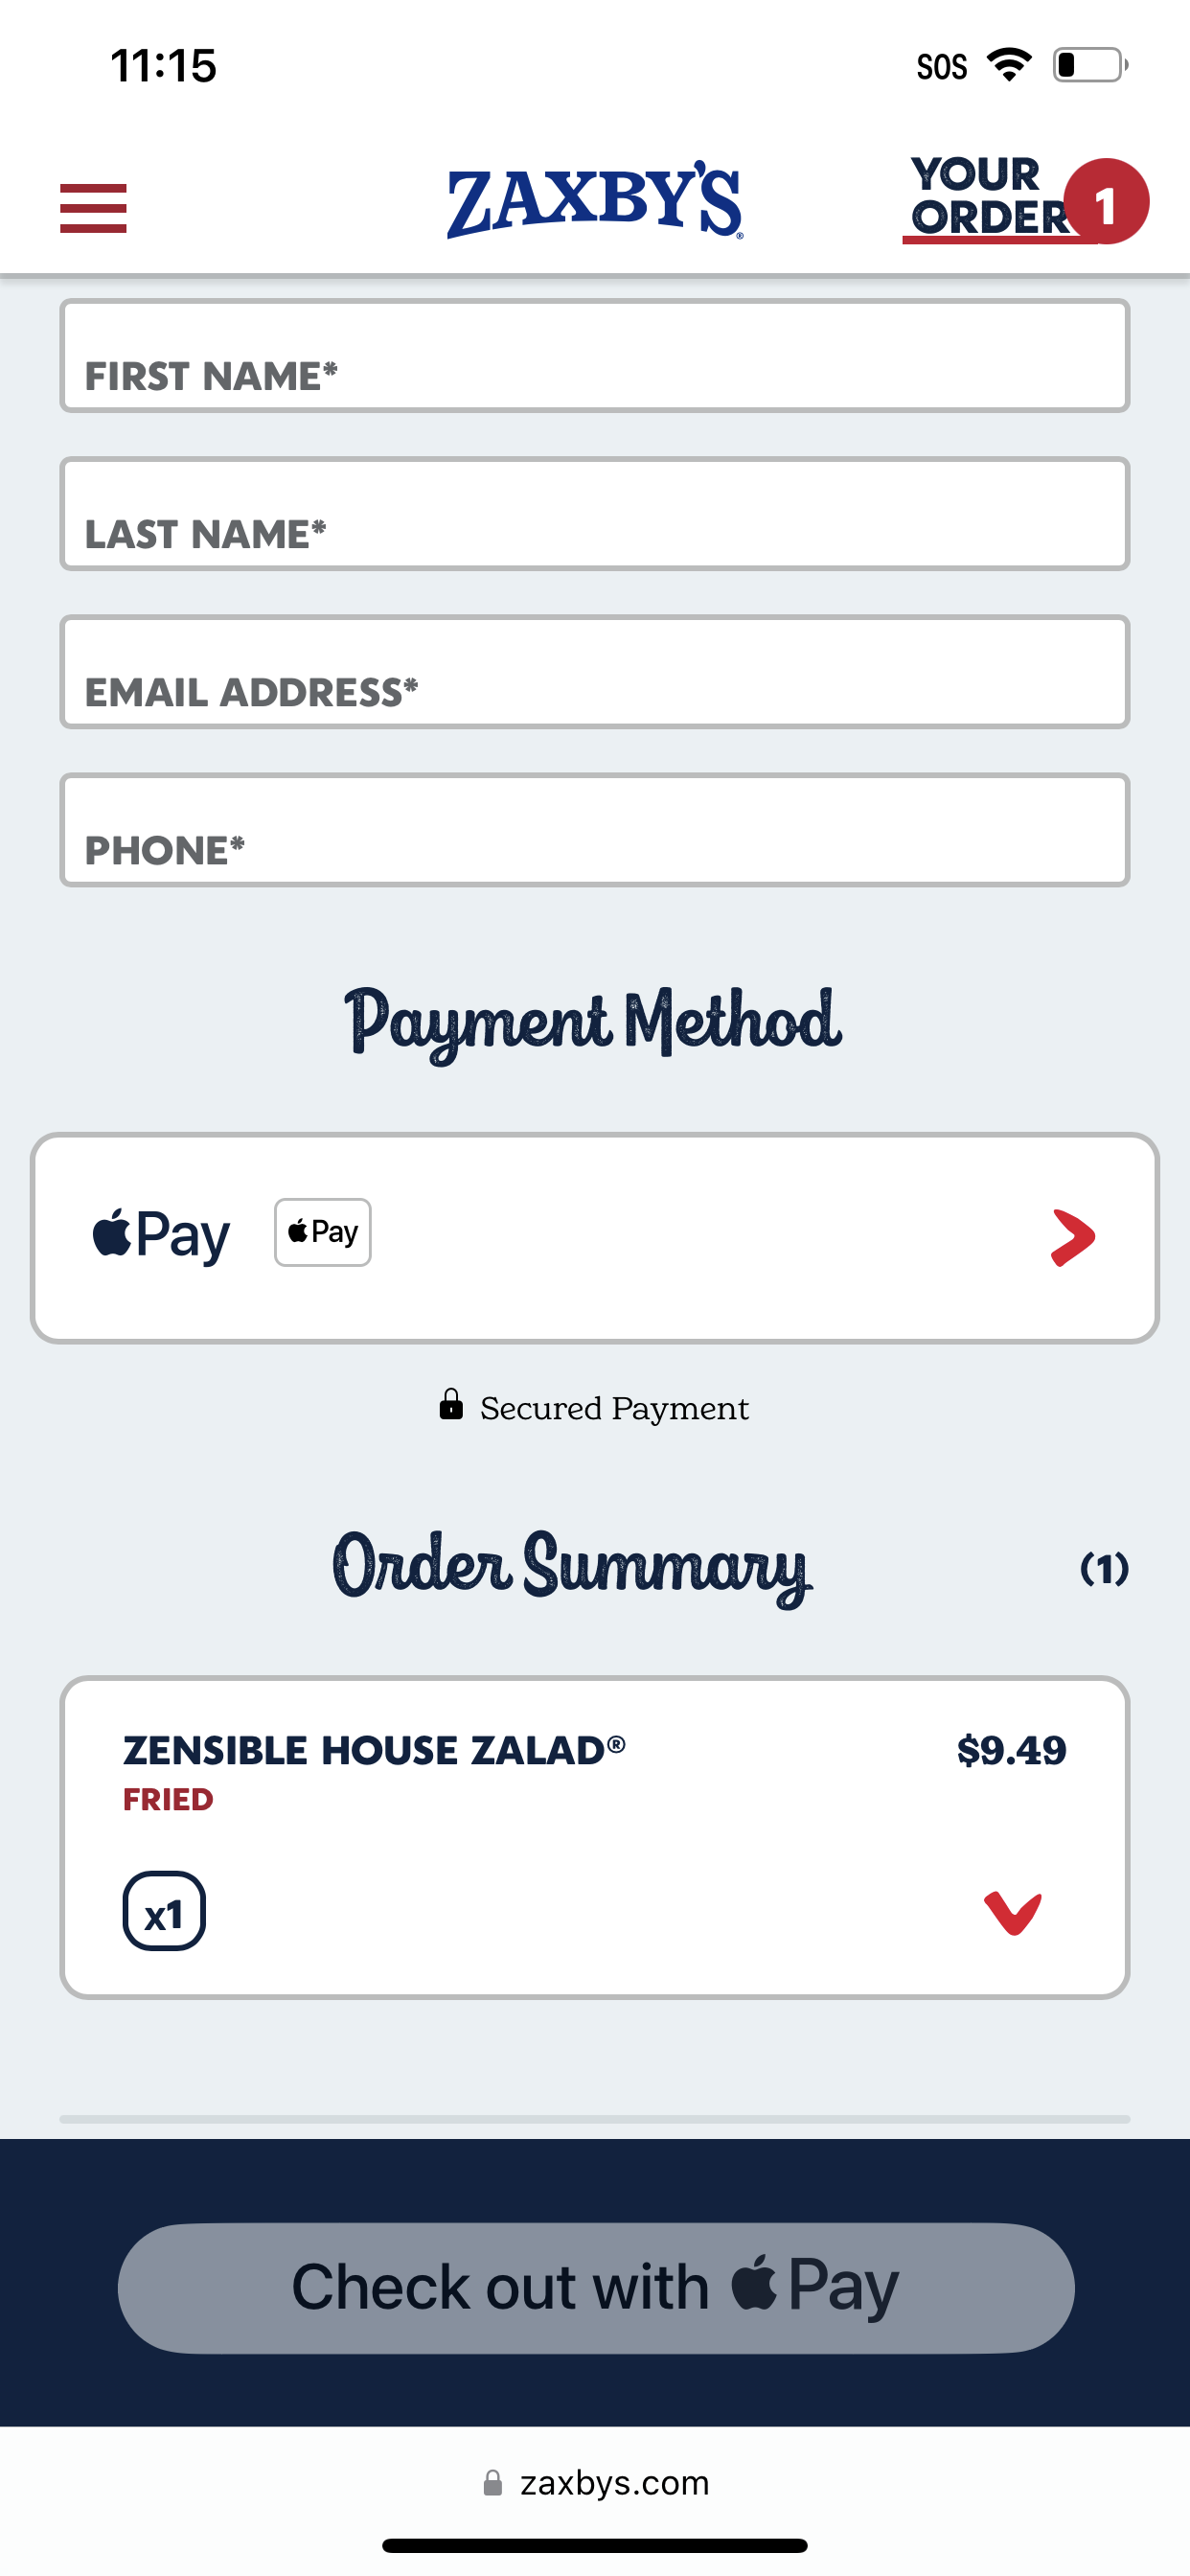 Zaxby's accepts Apple Pay on its website.